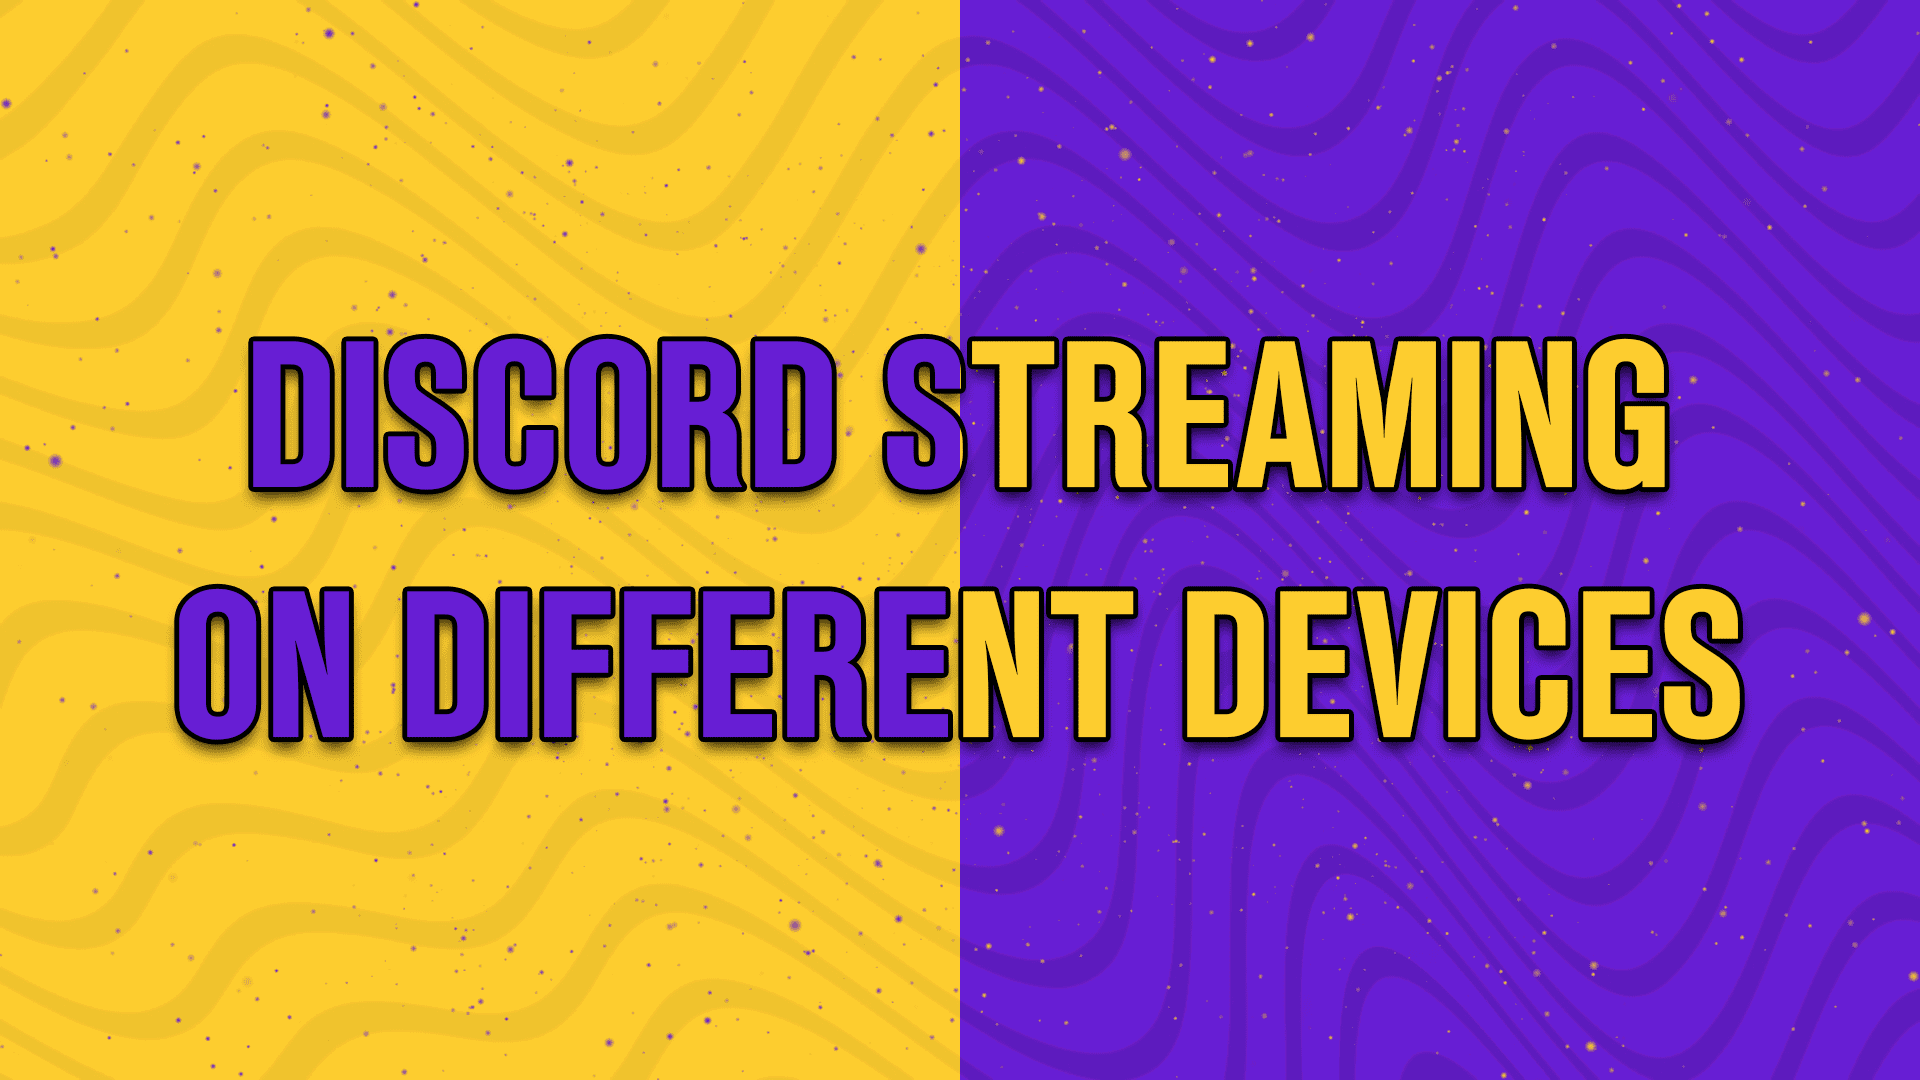 discord streaming on different devices - StreamBee